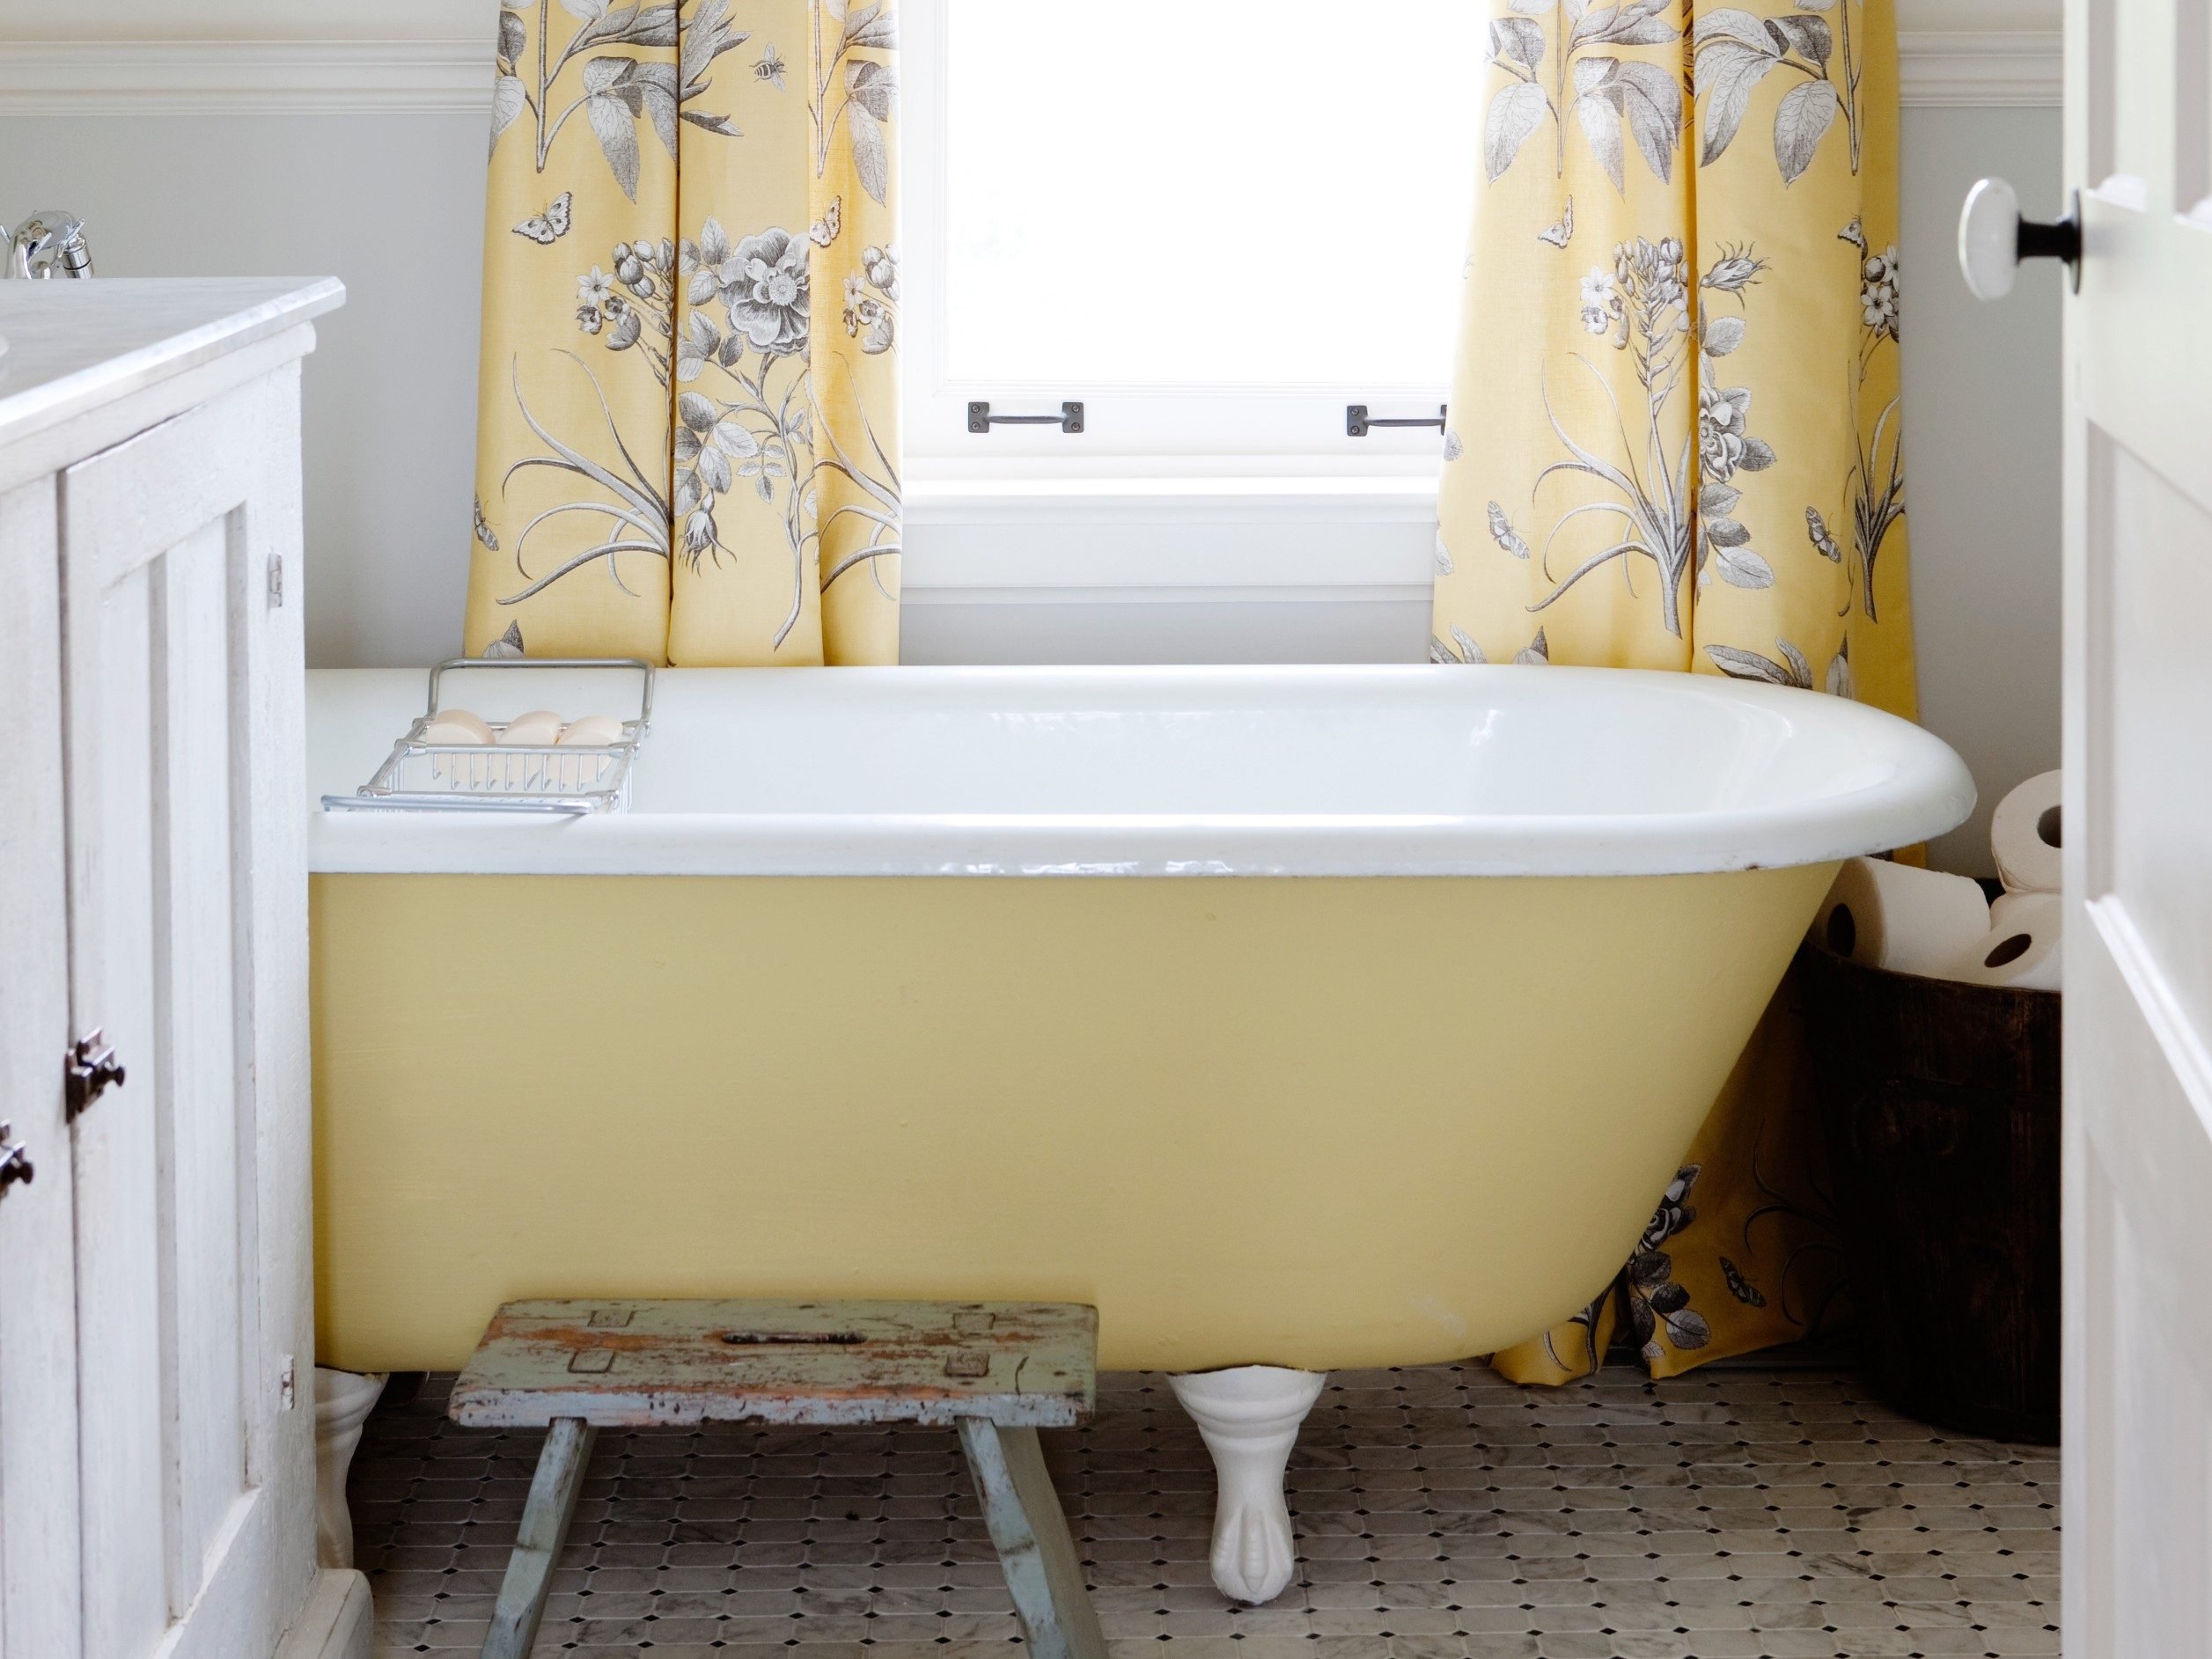 Thrifty decorating tip #4: Breathe new life into an old bathtub